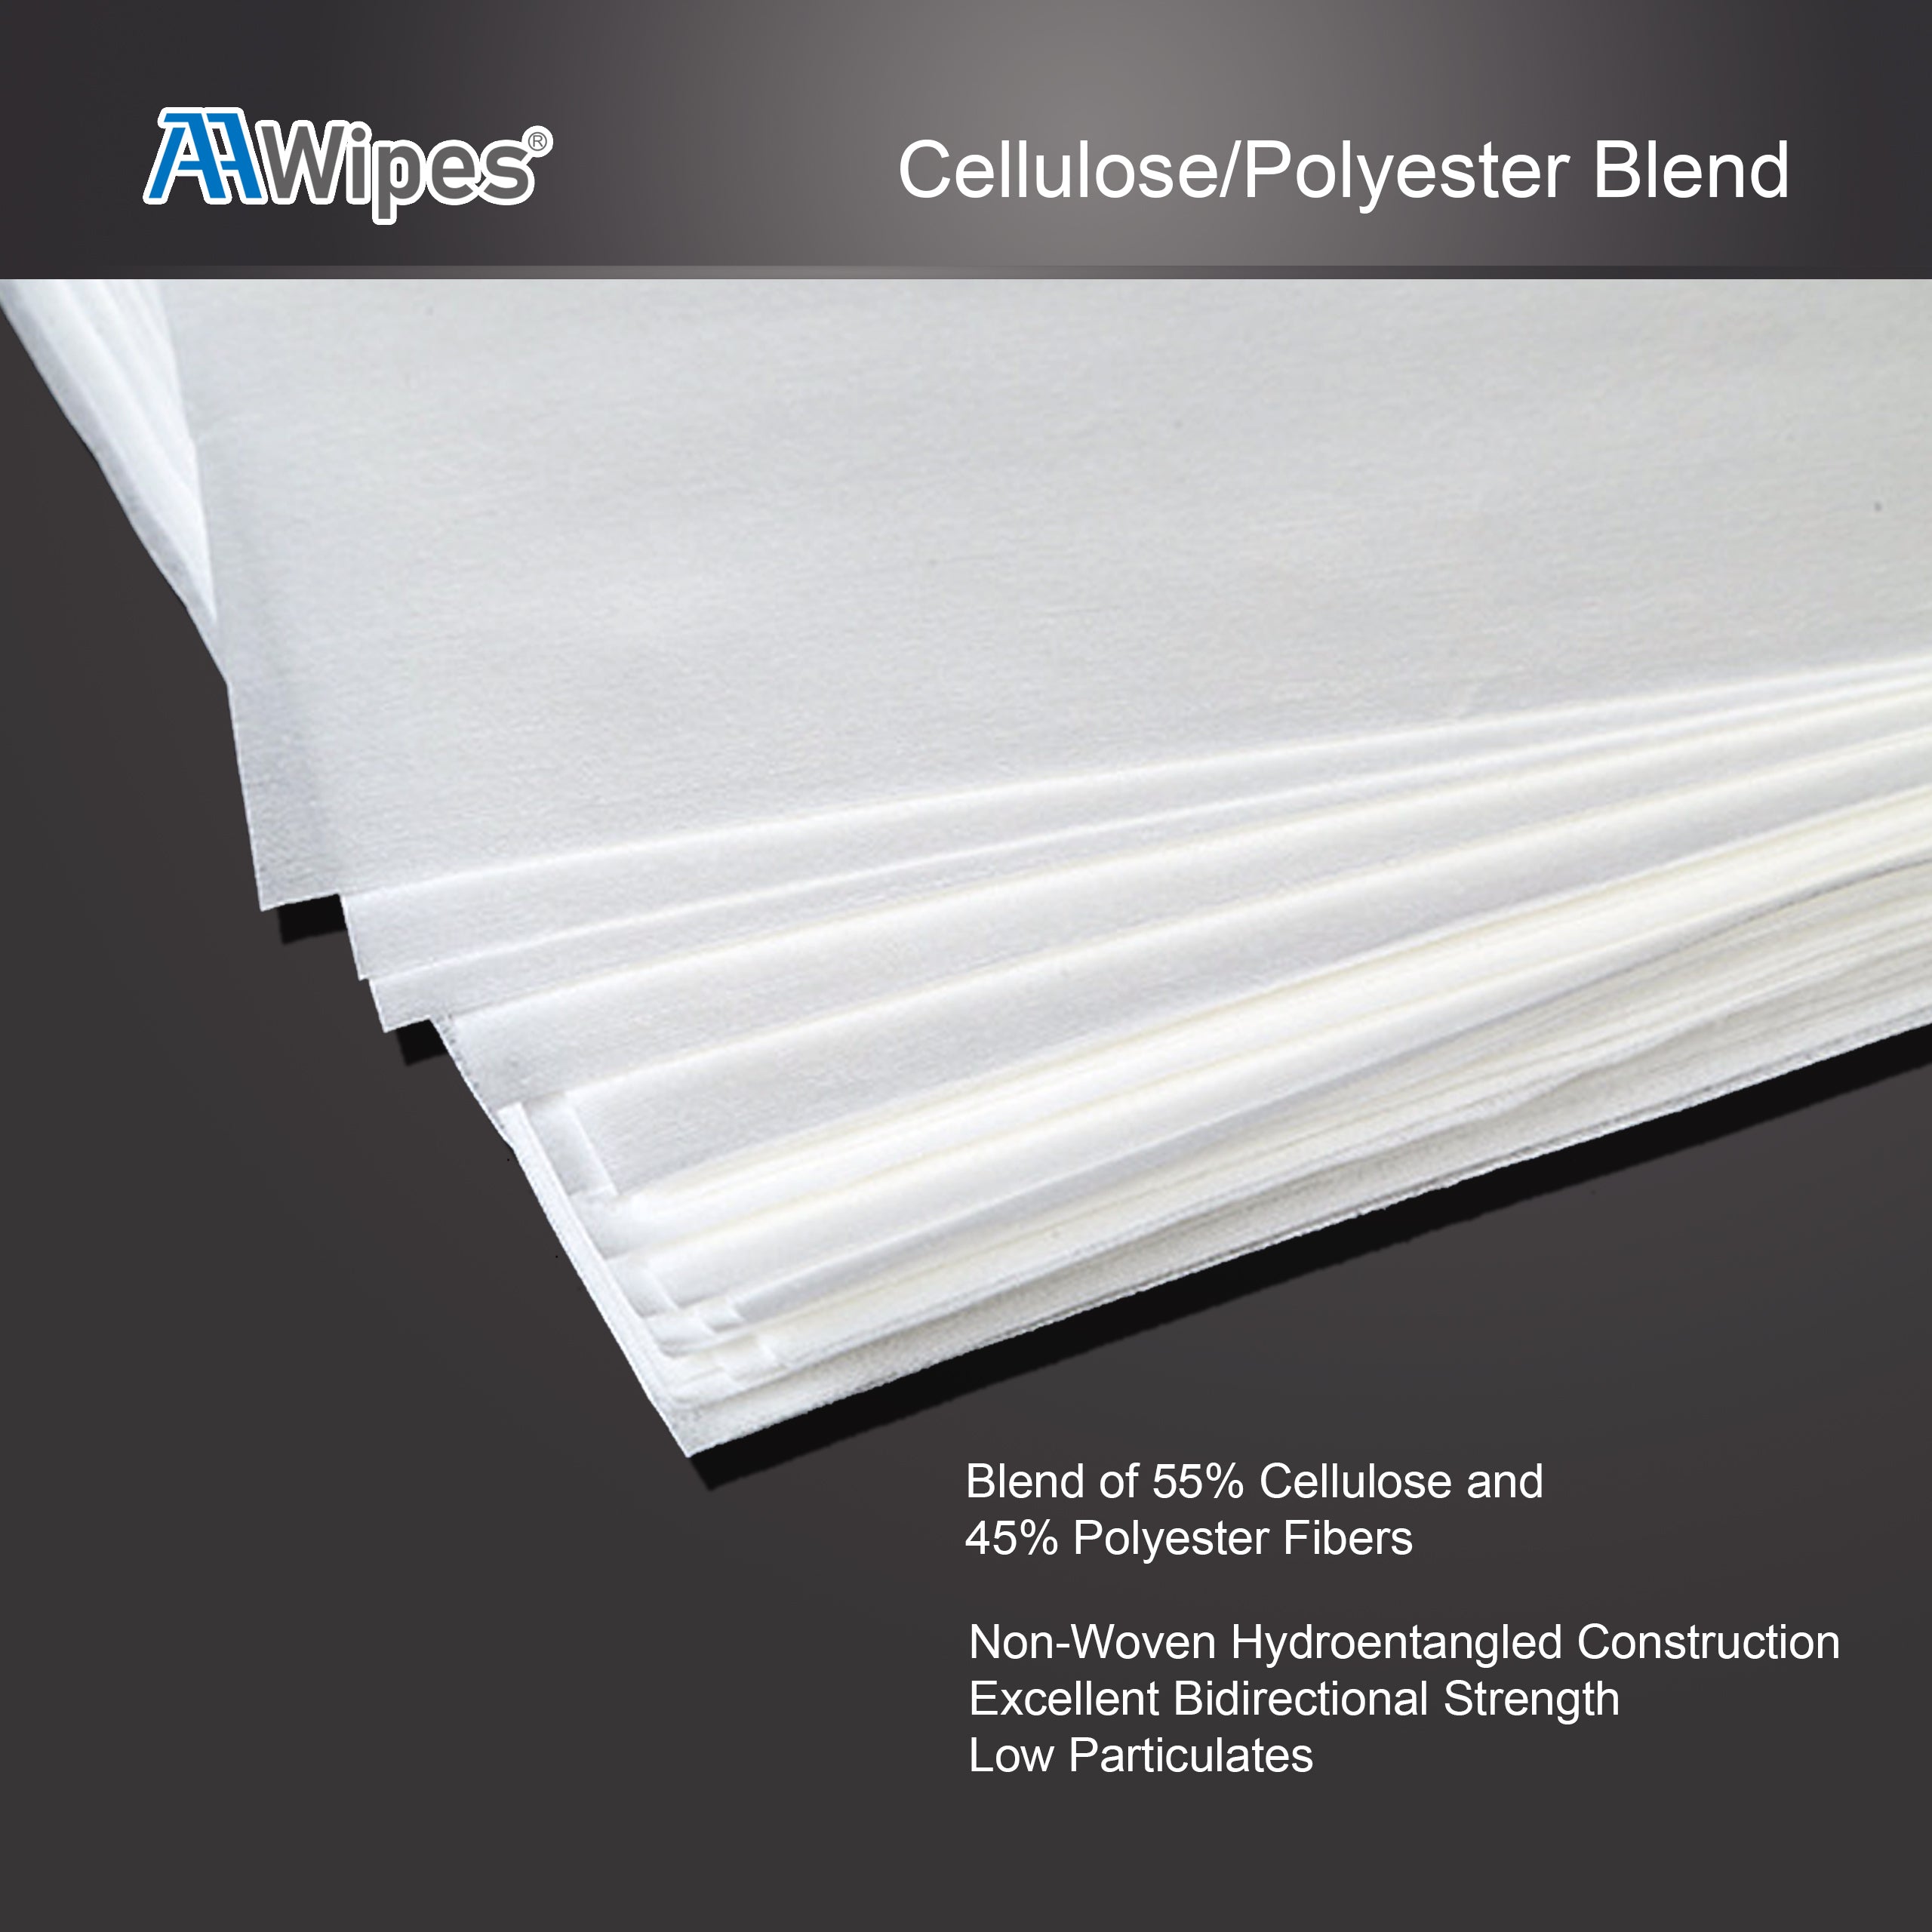 Cleanroom Wipes 12"x12" Cellulose/Polyester Nonwoven Wipers for for Lab, Electronics, Pharmaceutical, Printing and Semiconductor Industries. 3,000 wipes/box in 20 bags (No. NW06812).